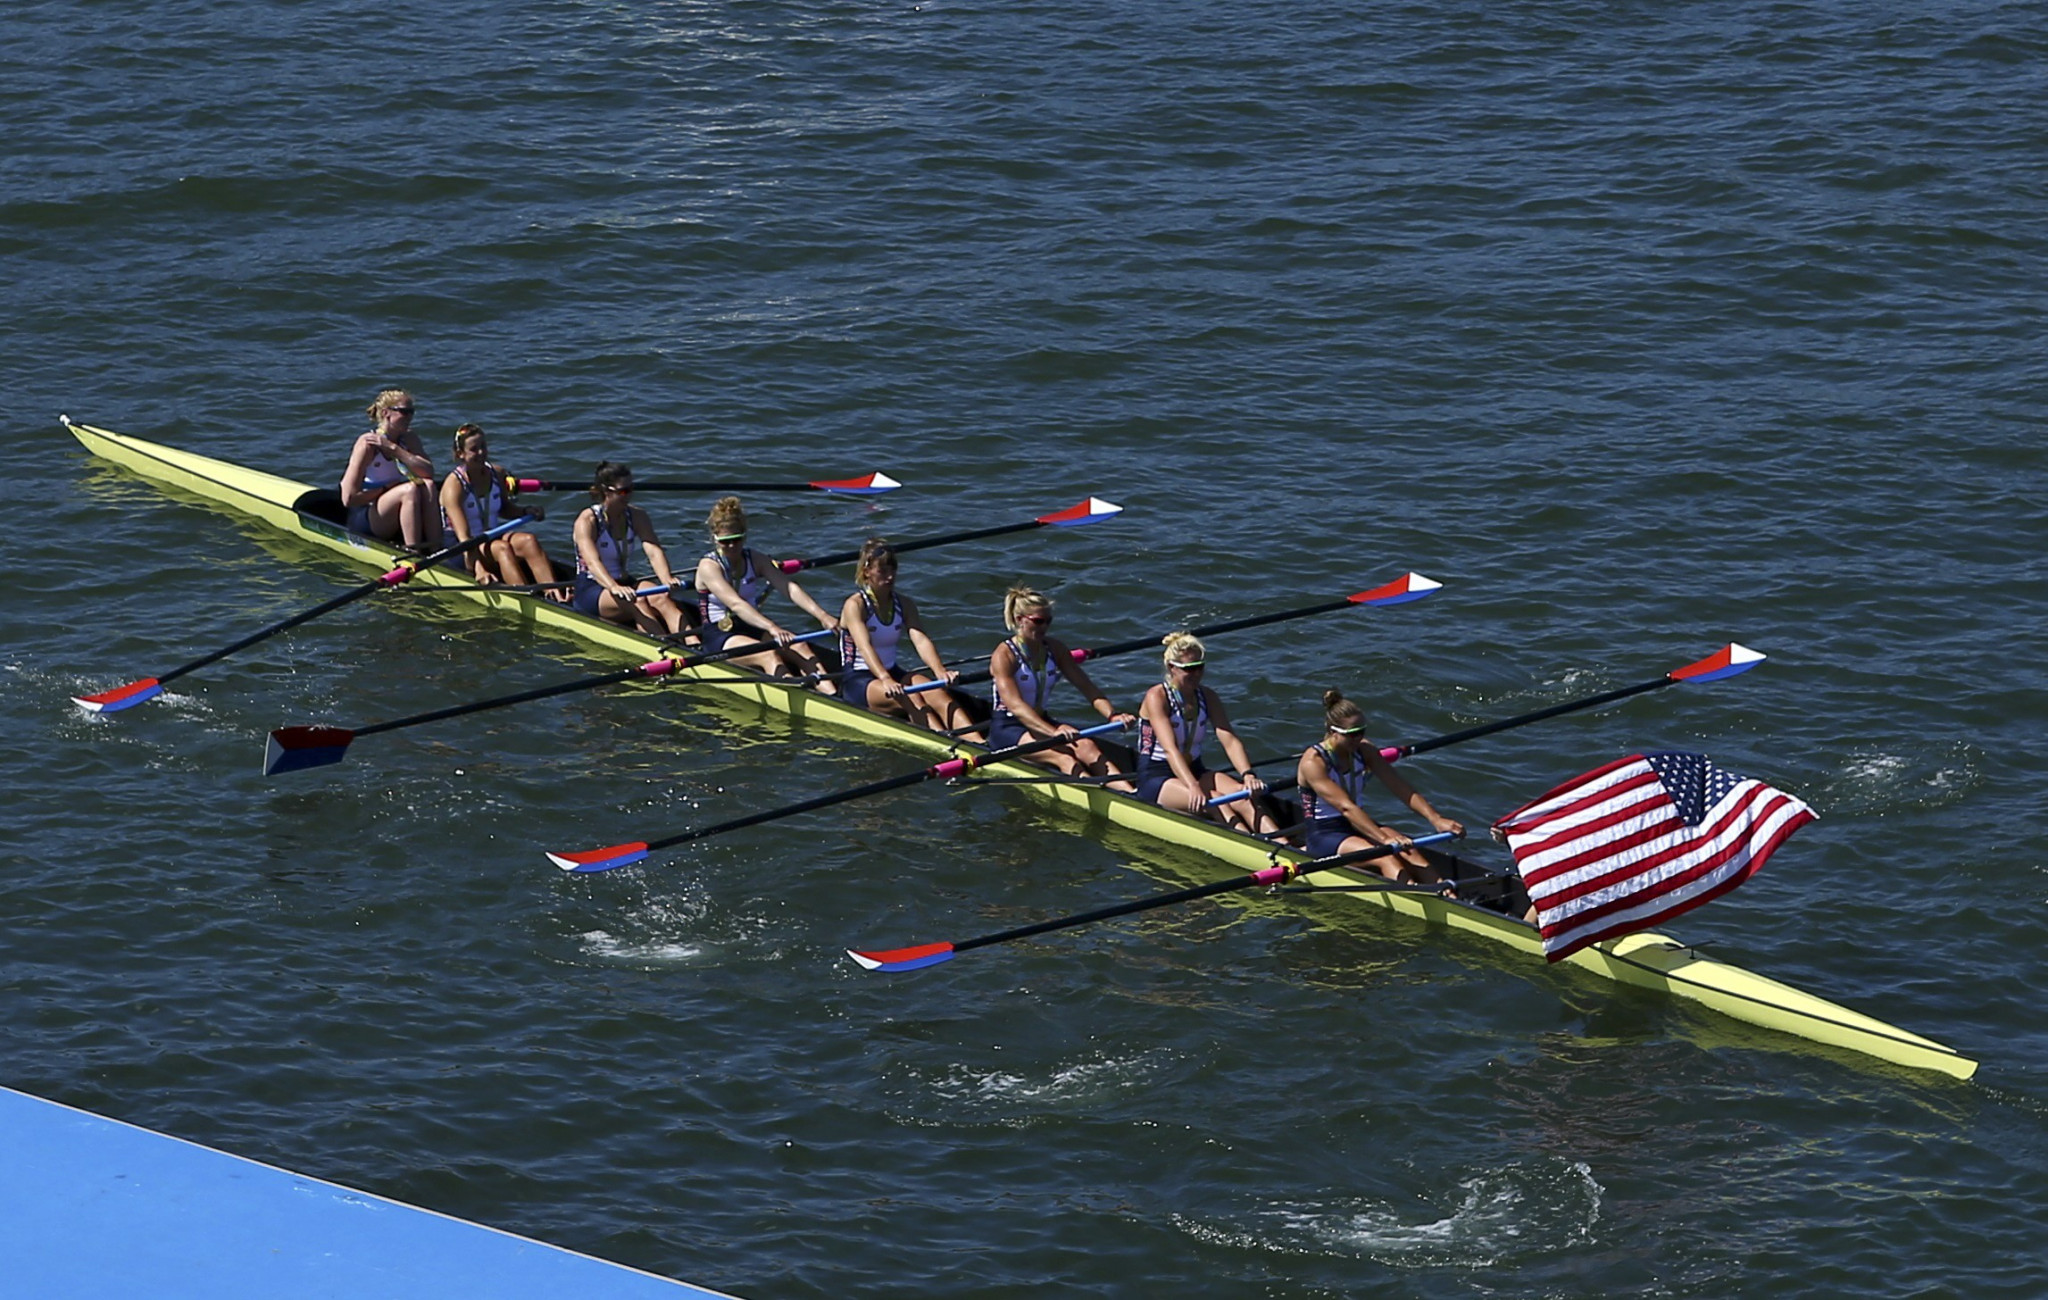 The rowing competition at the 2028 Olympic and Paralympic Games in Los Angeles may be switched to the Long Beach Marine Stadium ©Getty Images